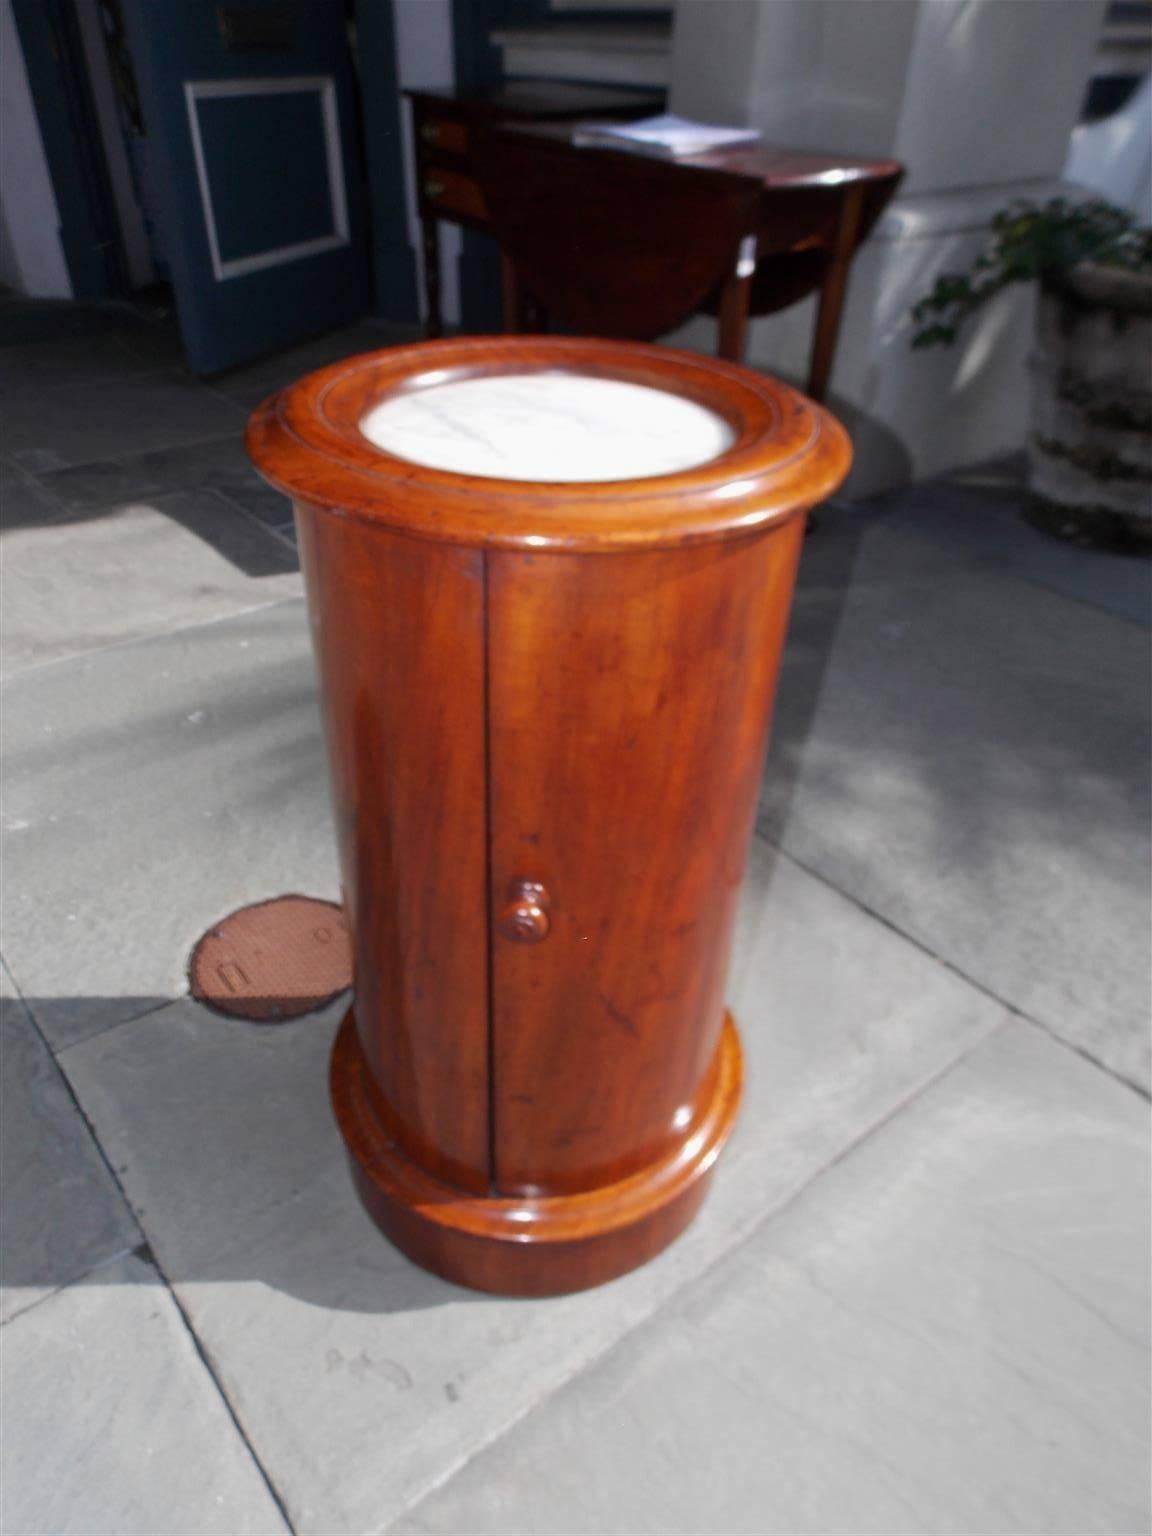 English Regency mahogany and marble-top pedestal commode with a carved molded edge top, original wood knob, hinged door with interior shelf , and terminating on a circular carved molded edge base, Early 19th century.